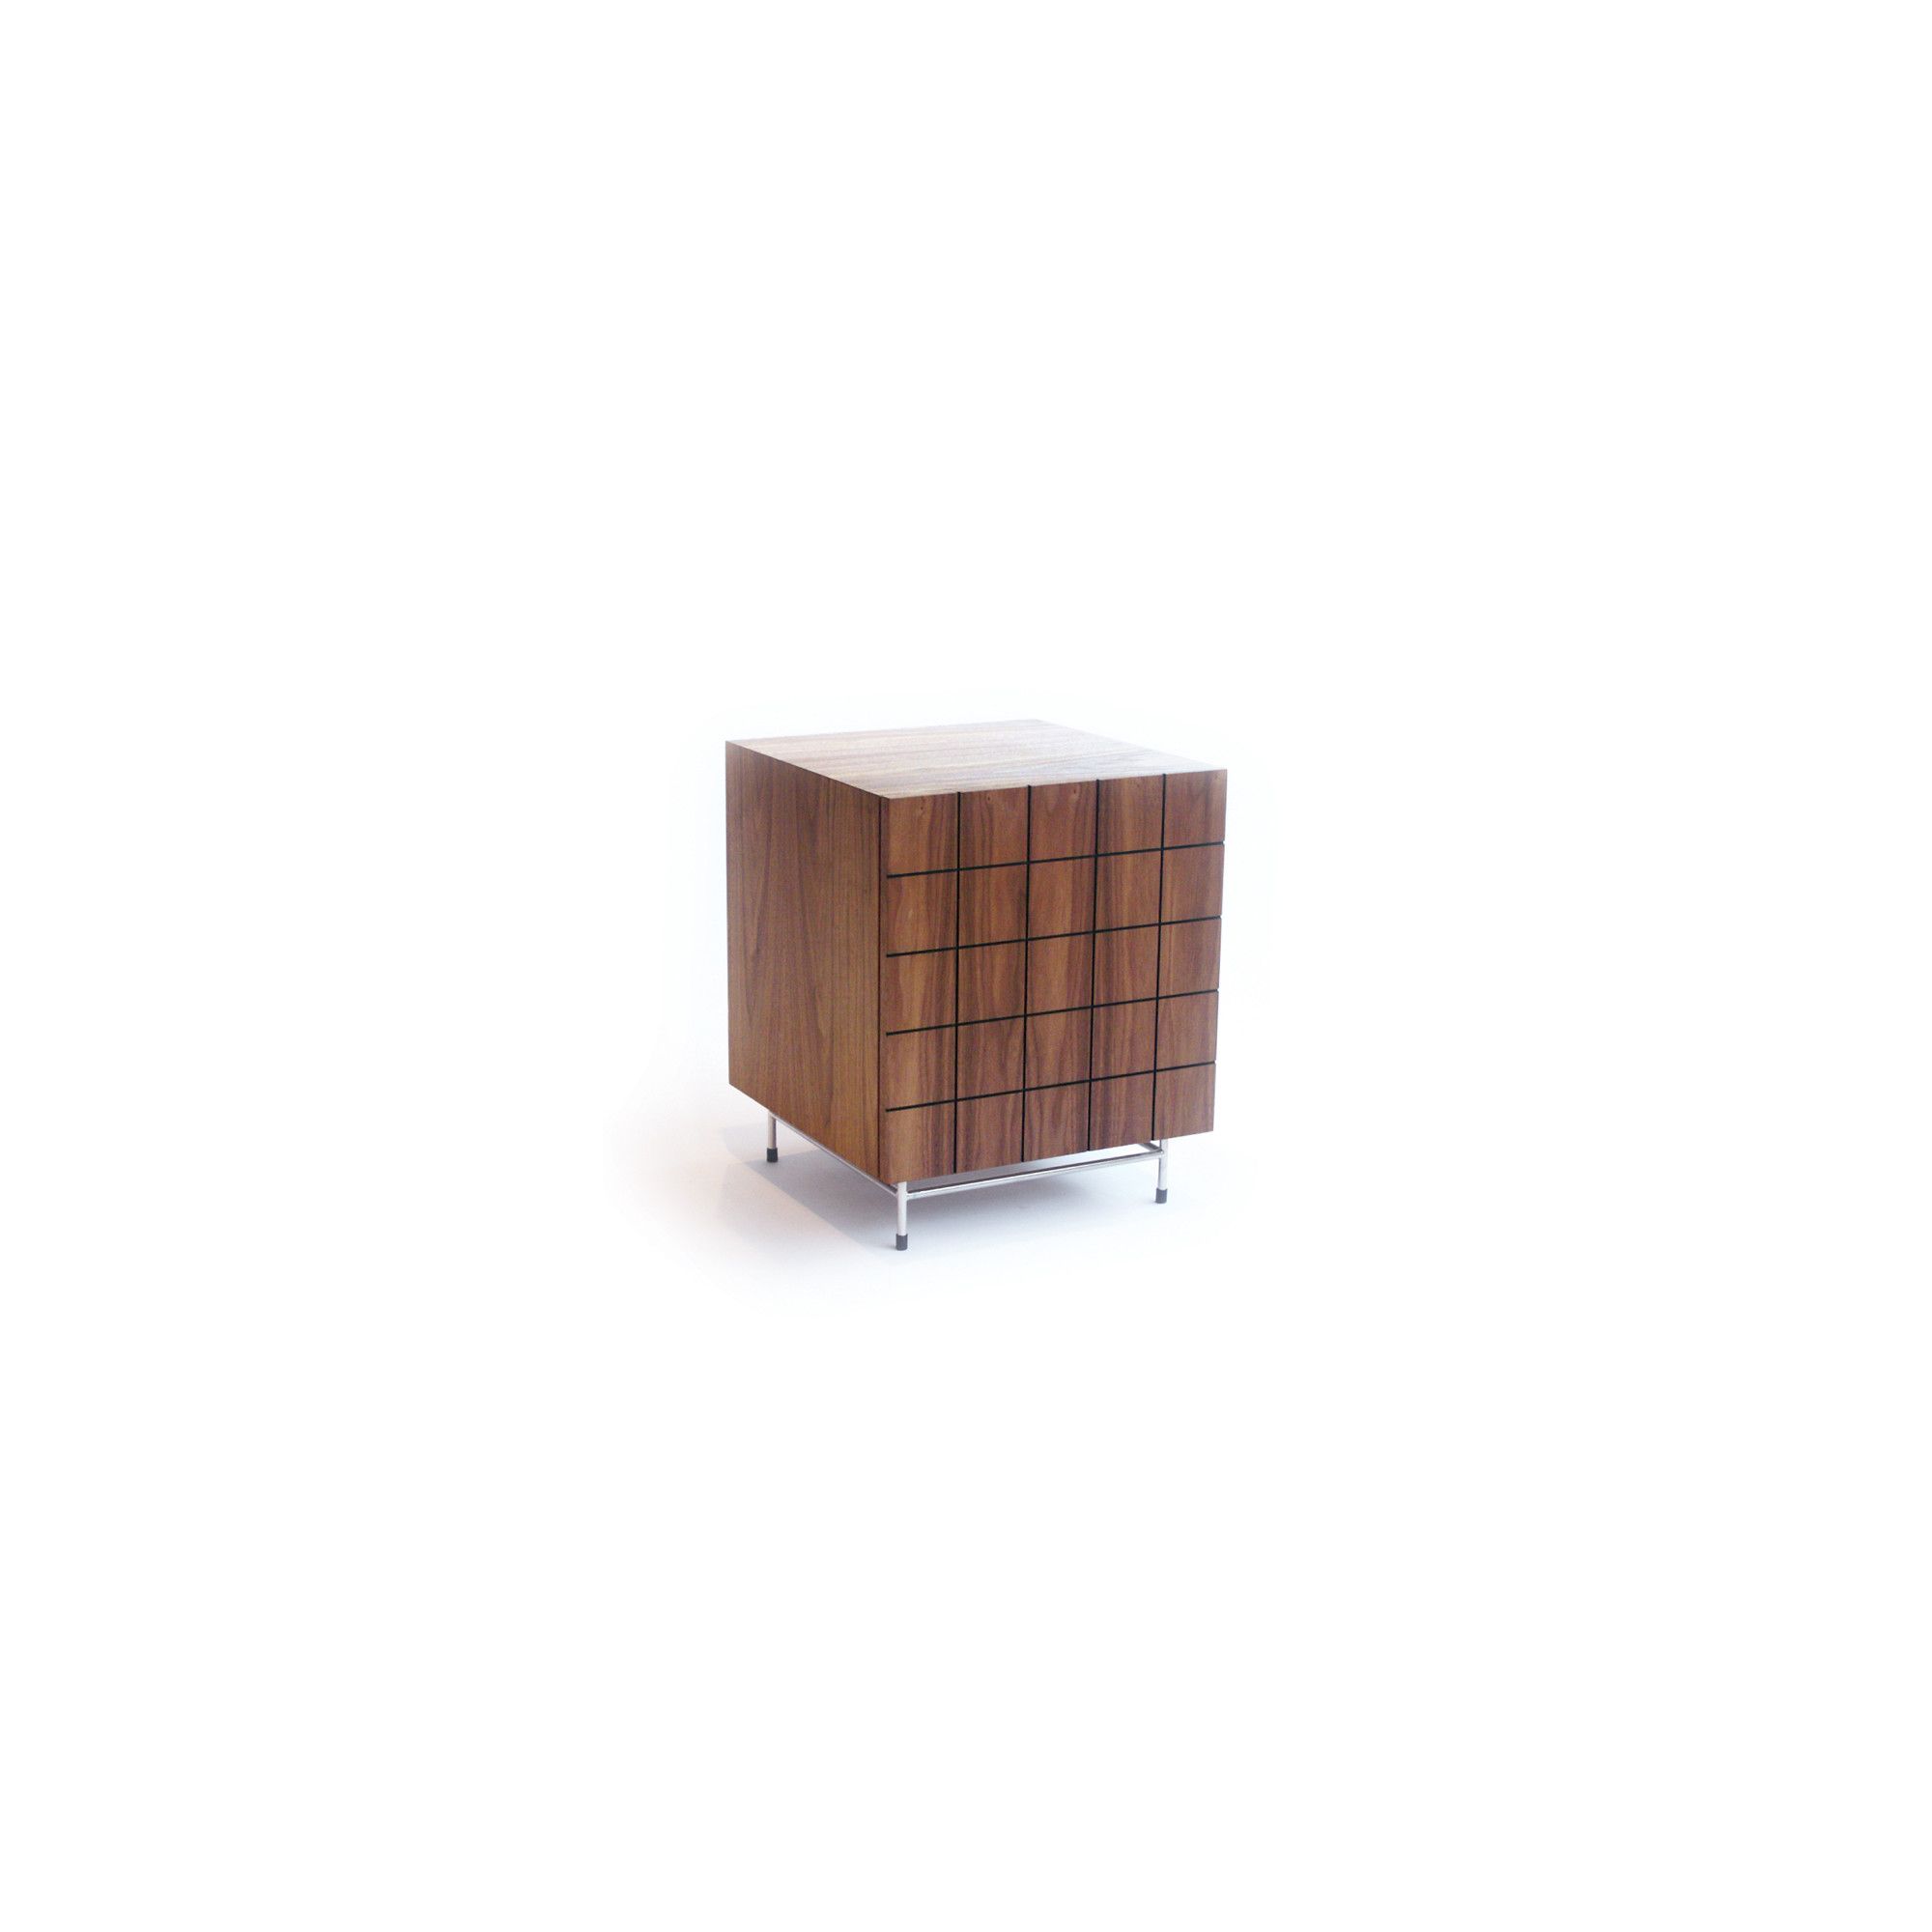 Gillmore Space Barcelona Bedside Table - Walnut at Tesco Direct